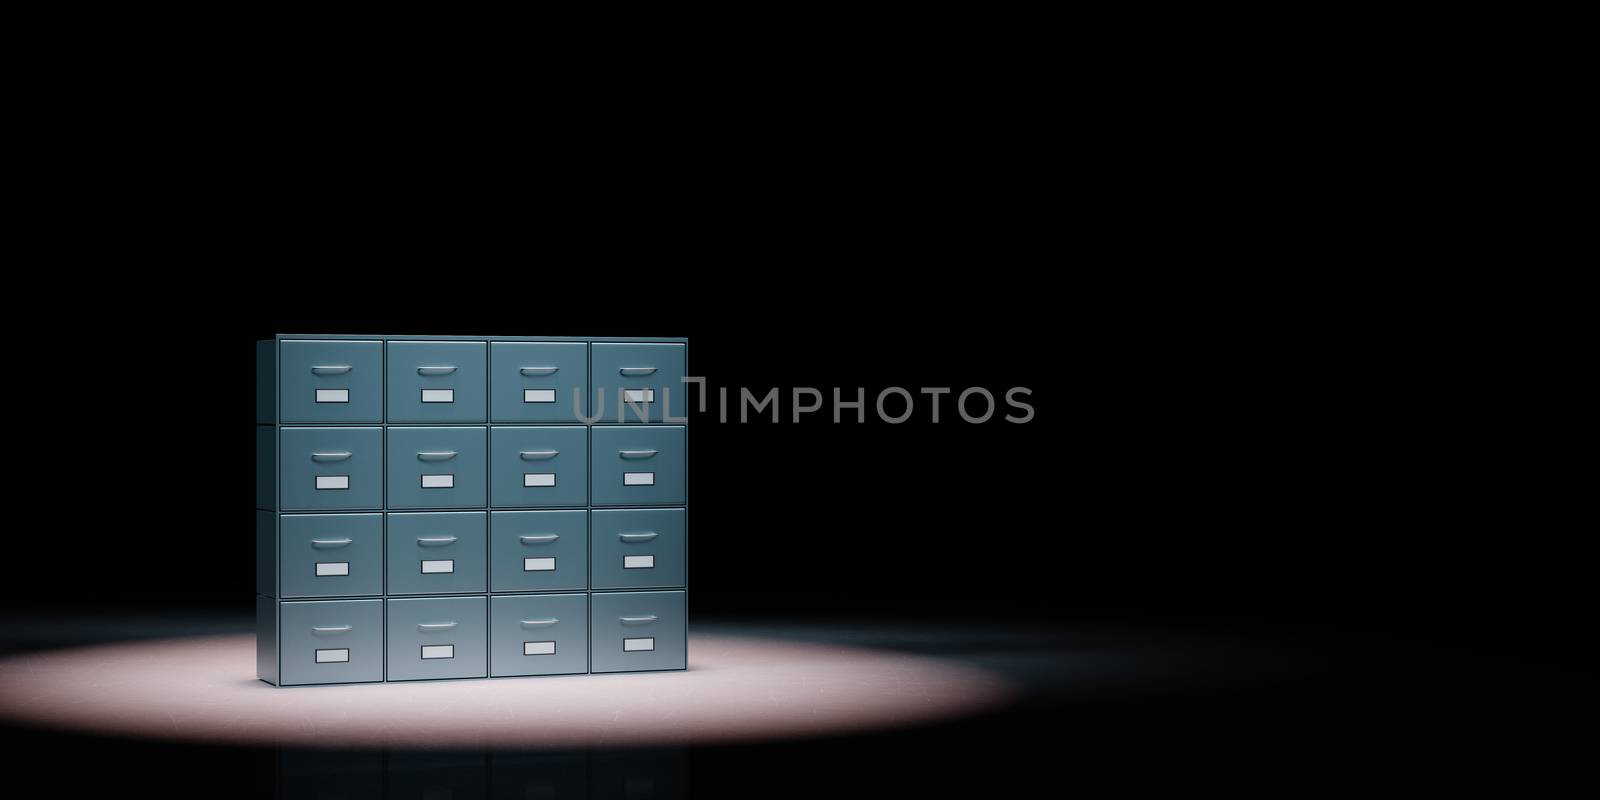 Metallic Archive Rack Spotlighted on Black Background with Copy Space 3D Illustration